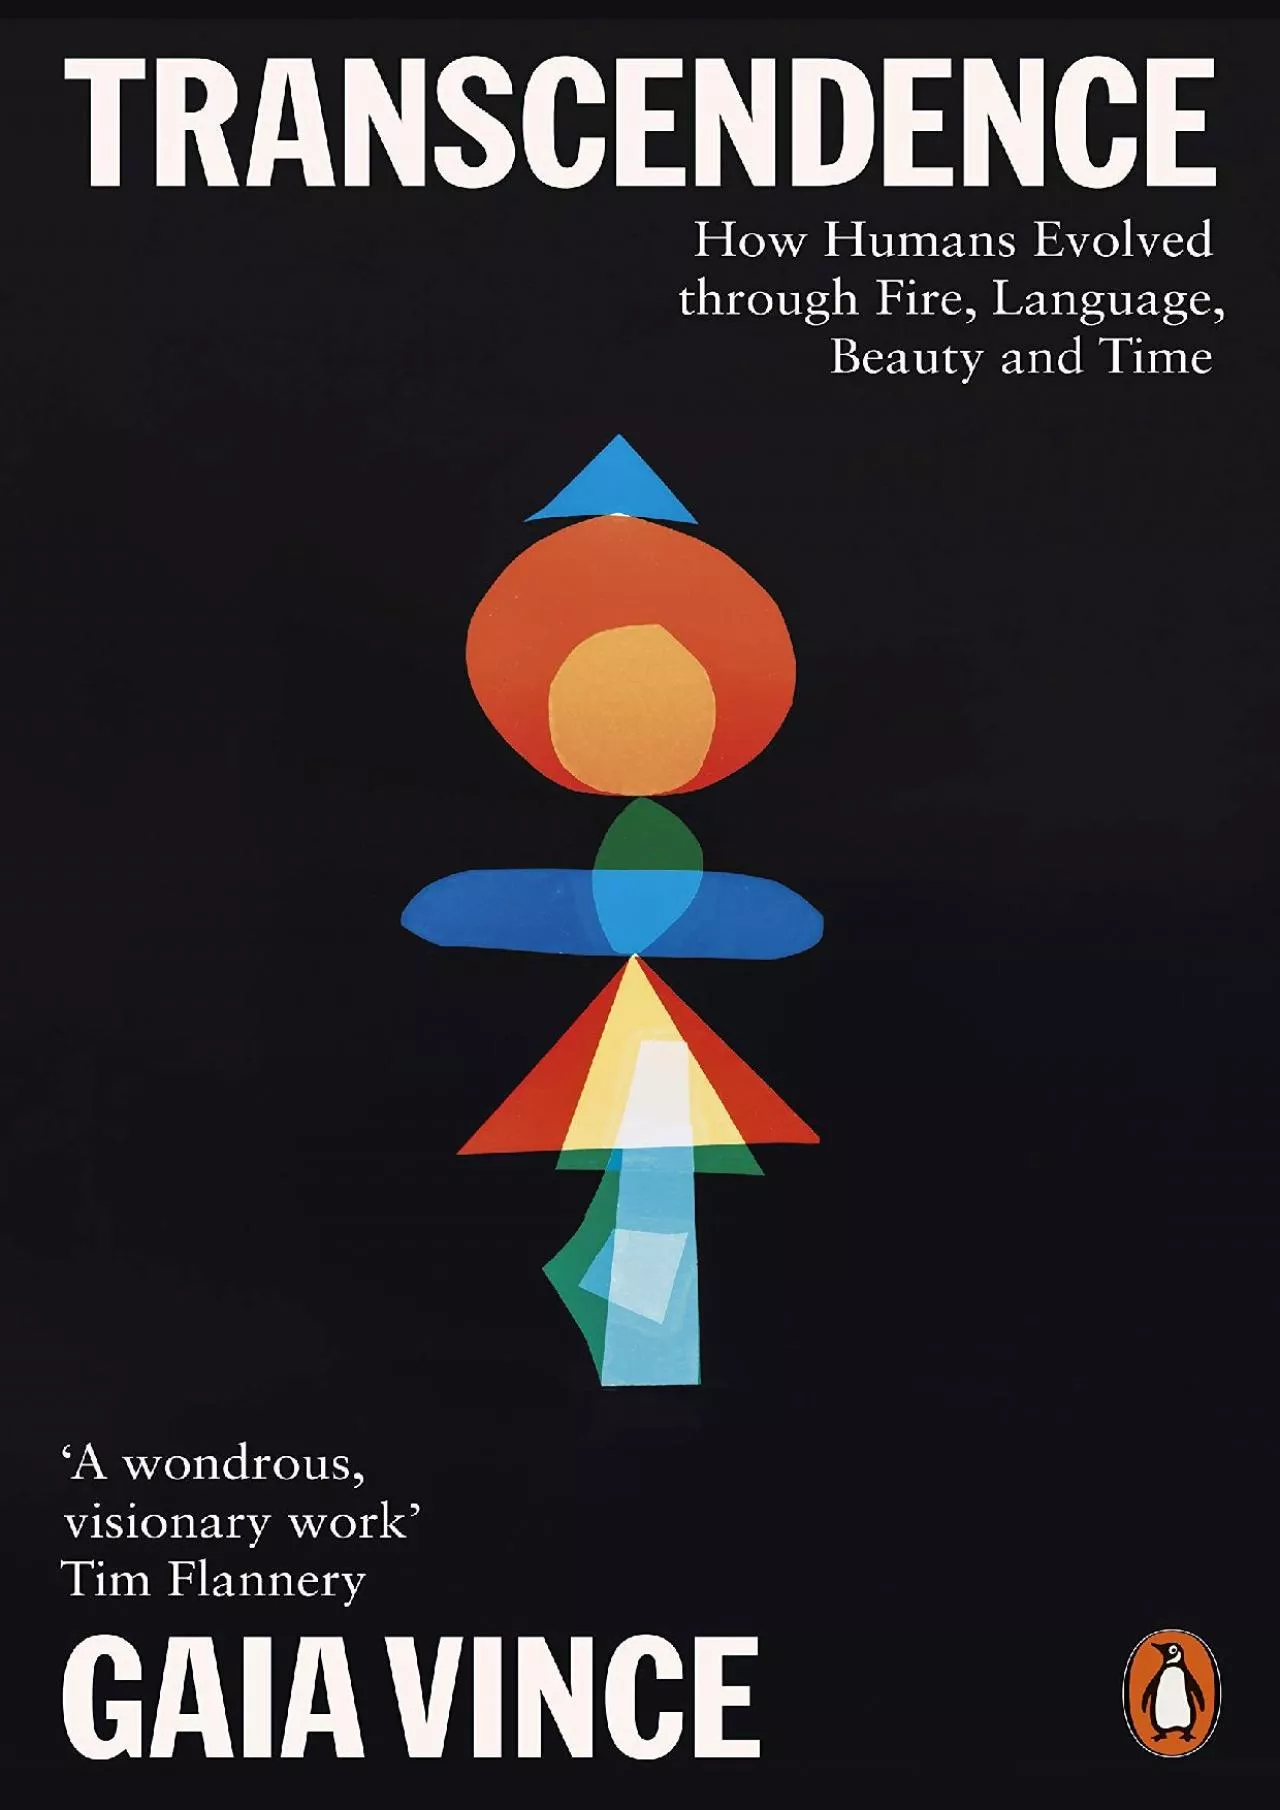 (BOOK)-Transcendence: How Humans Evolved through Fire, Language, Beauty, and Time